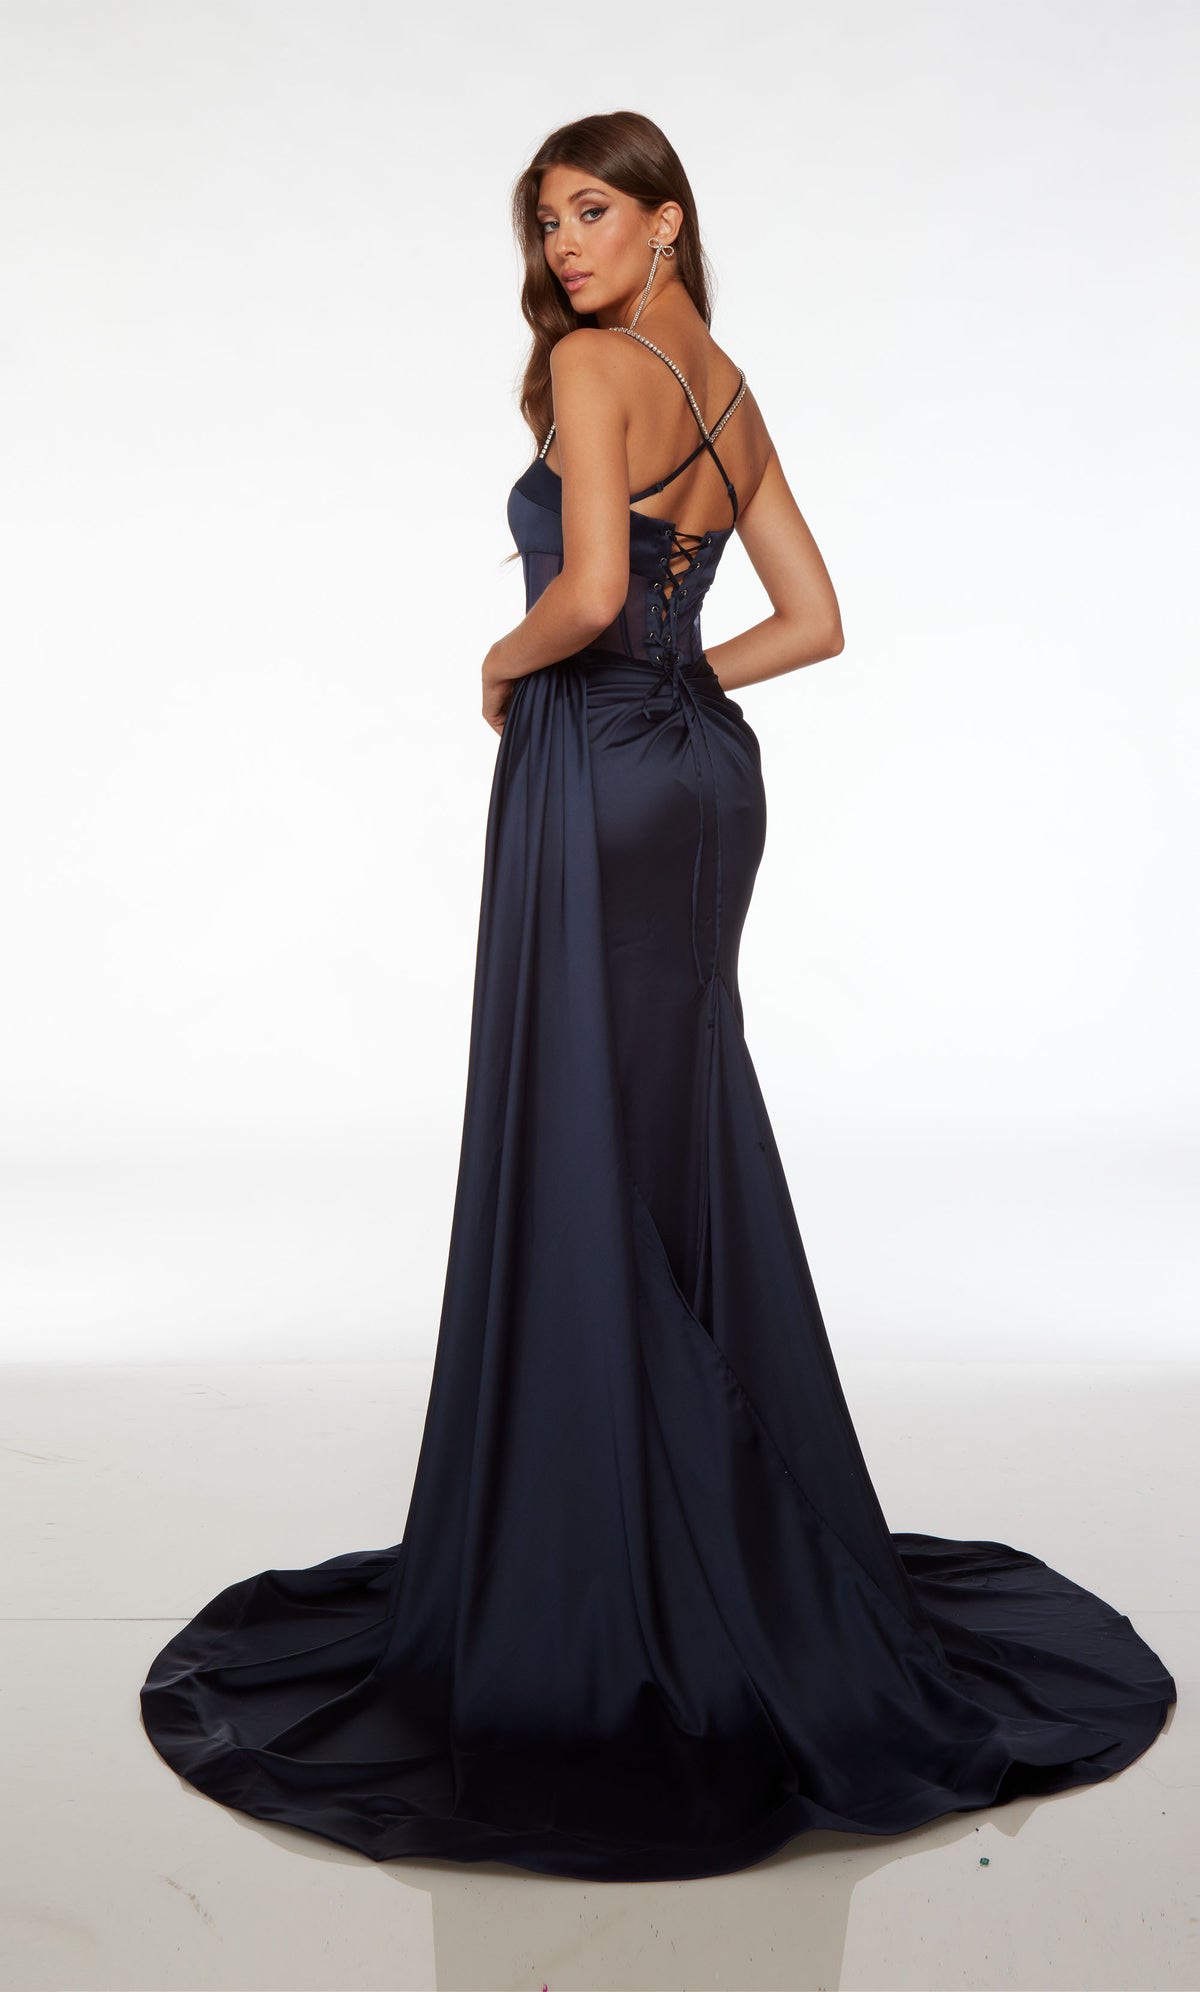 Midnight blue satin gown: Plunging sheer corset top, high slit, ruching detail, train, and detachable side train for added drama and flair to the elegant look.